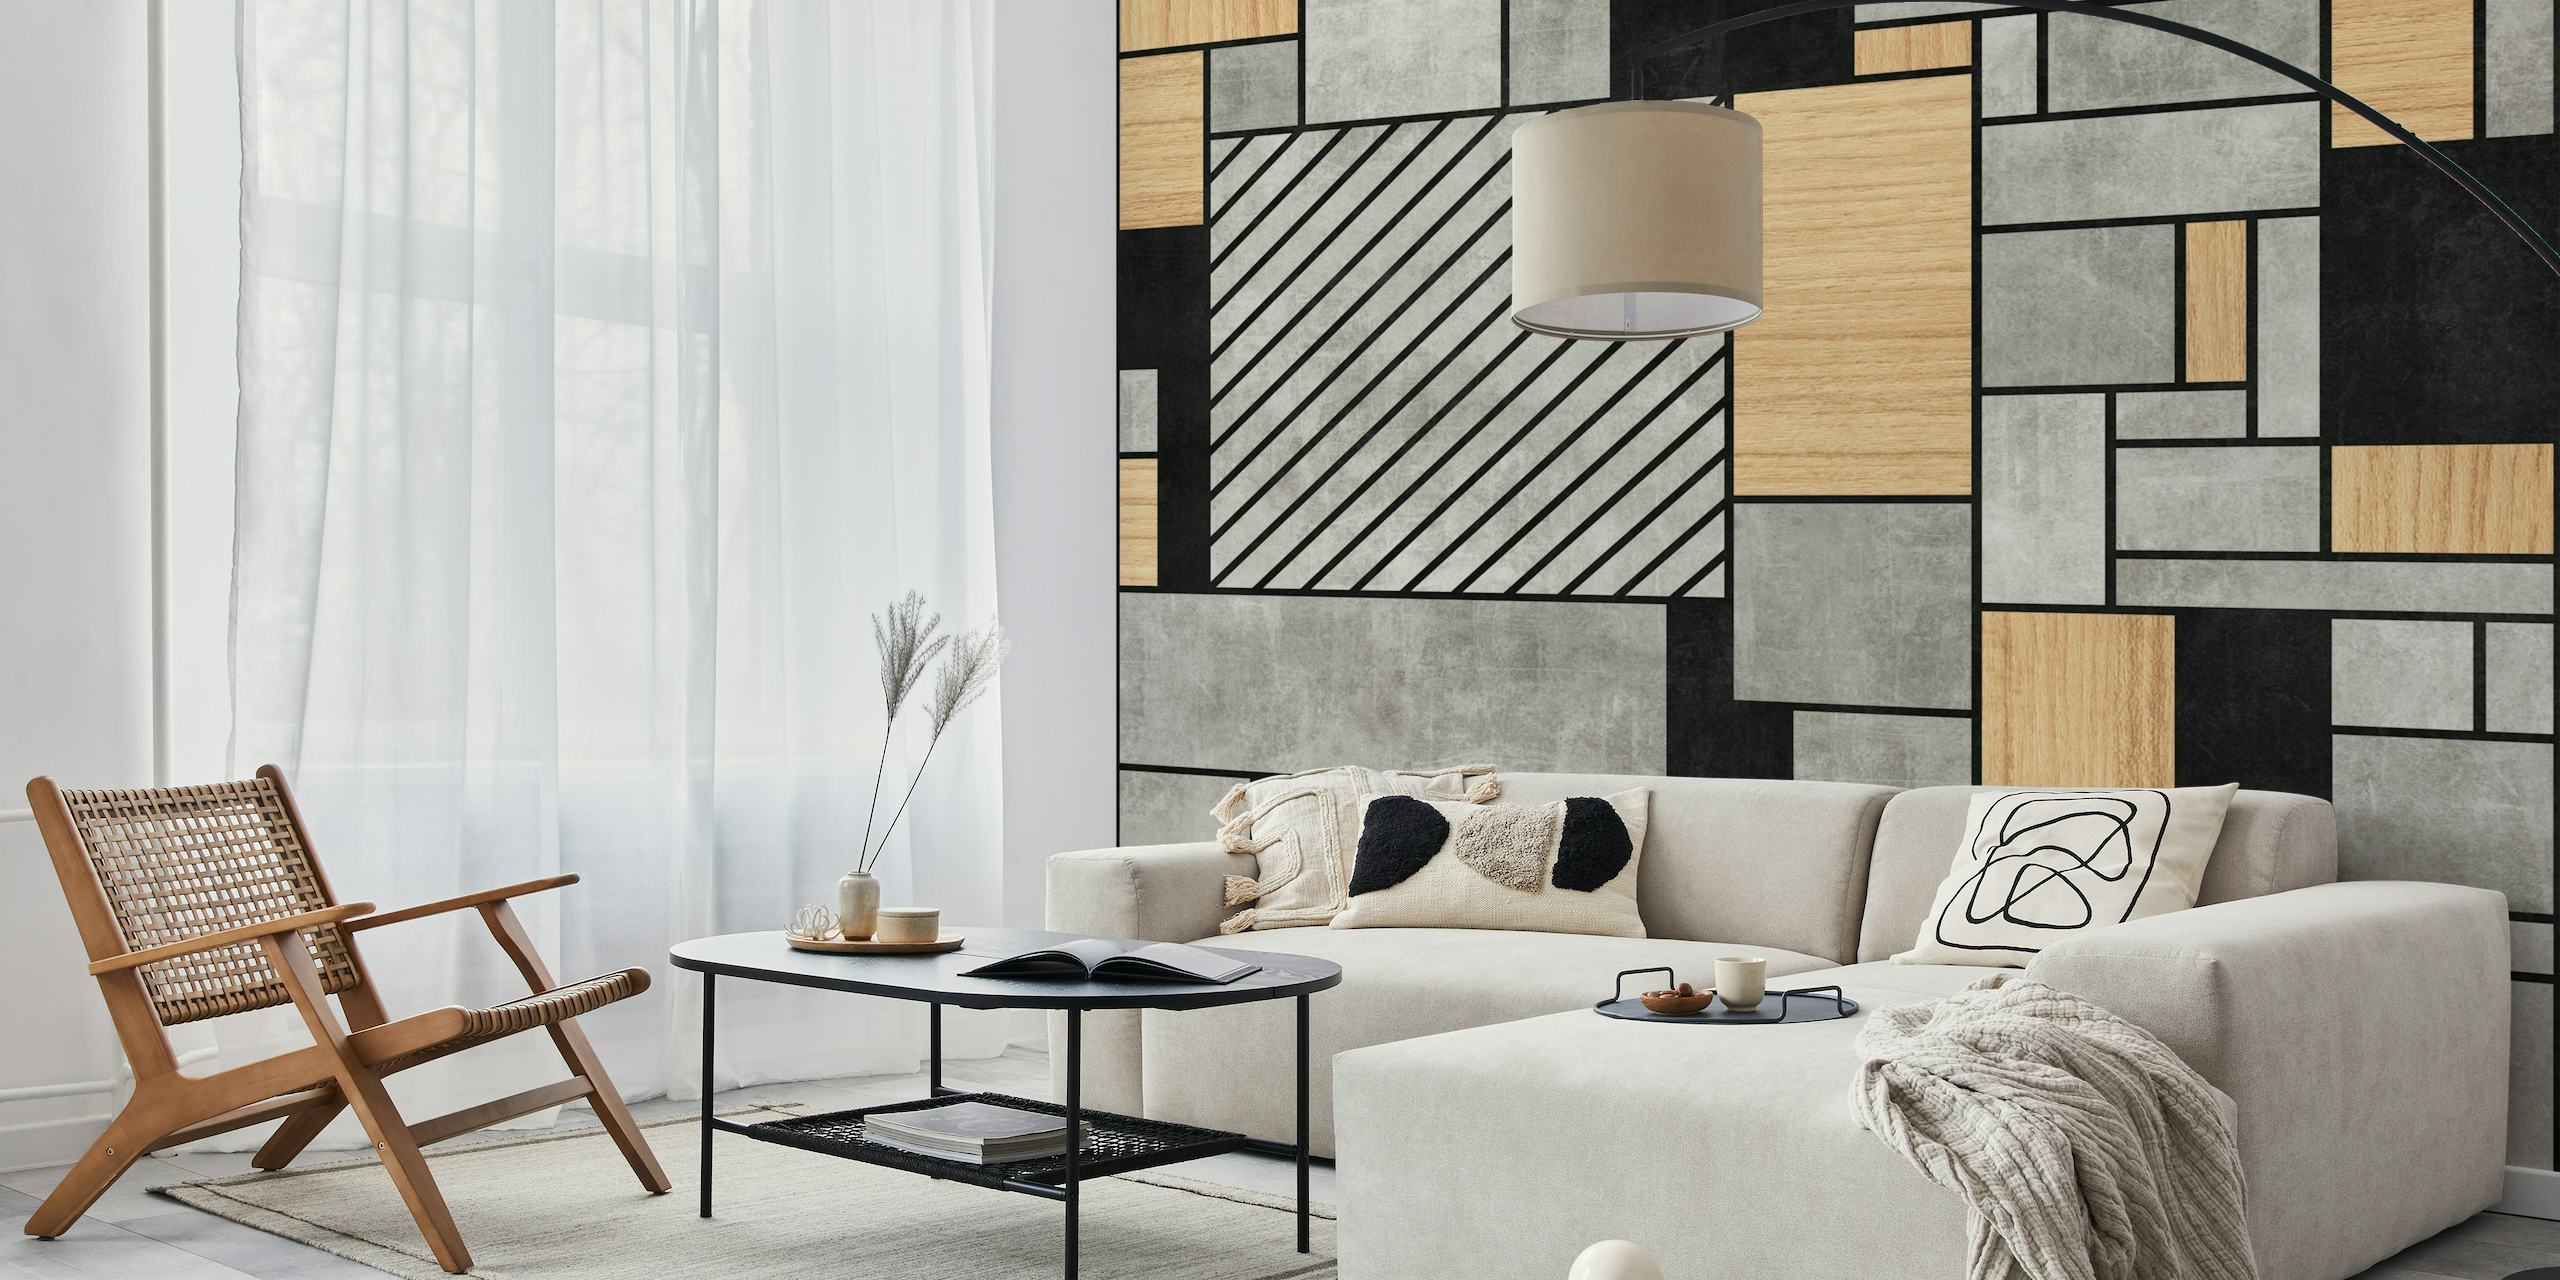 Abstract random pattern wall mural with concrete and wood textures for modern interiors